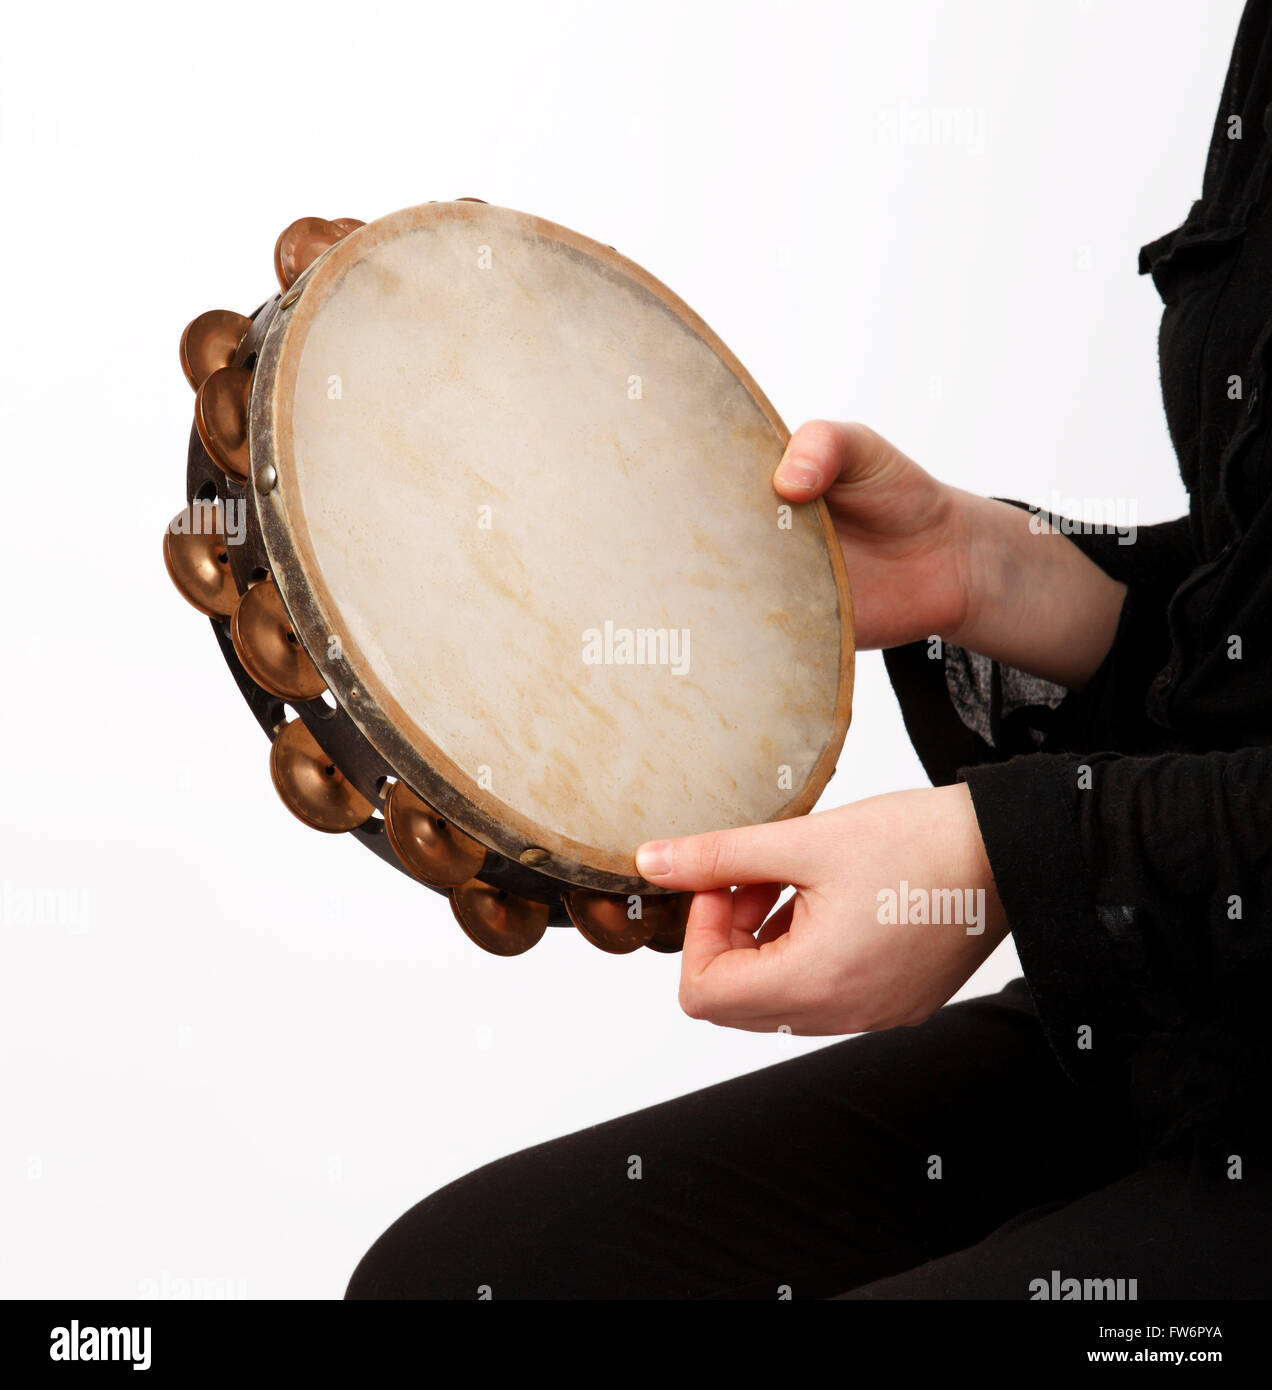 Tambourine technique, a thumb roll in playing position. Stock Photo